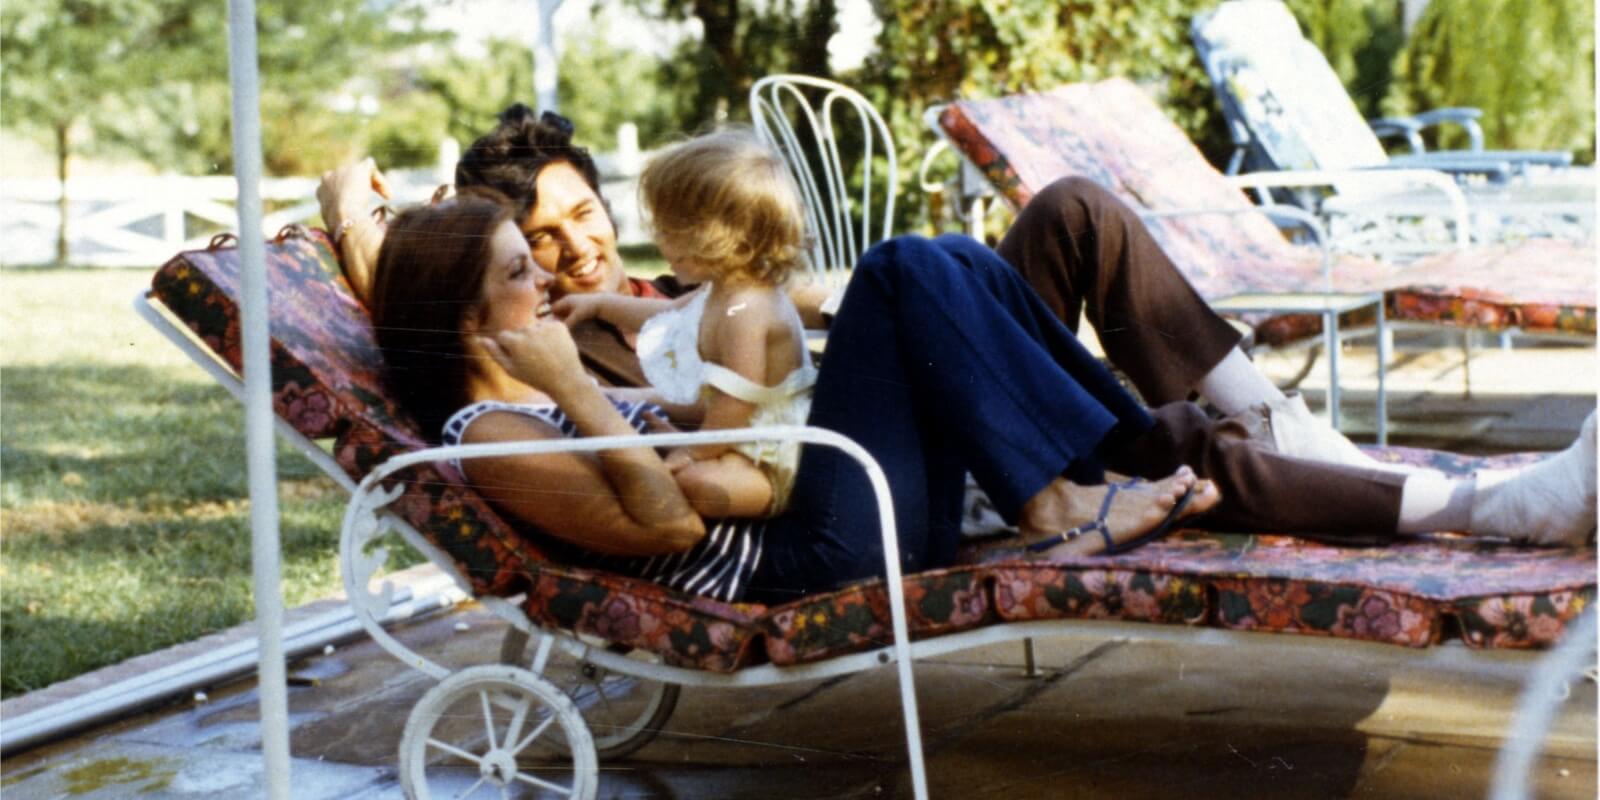 Lisa Marie Presley as a toddler photographed with her mother, Priscilla Presley and father, Elvis Presley, at Graceland.